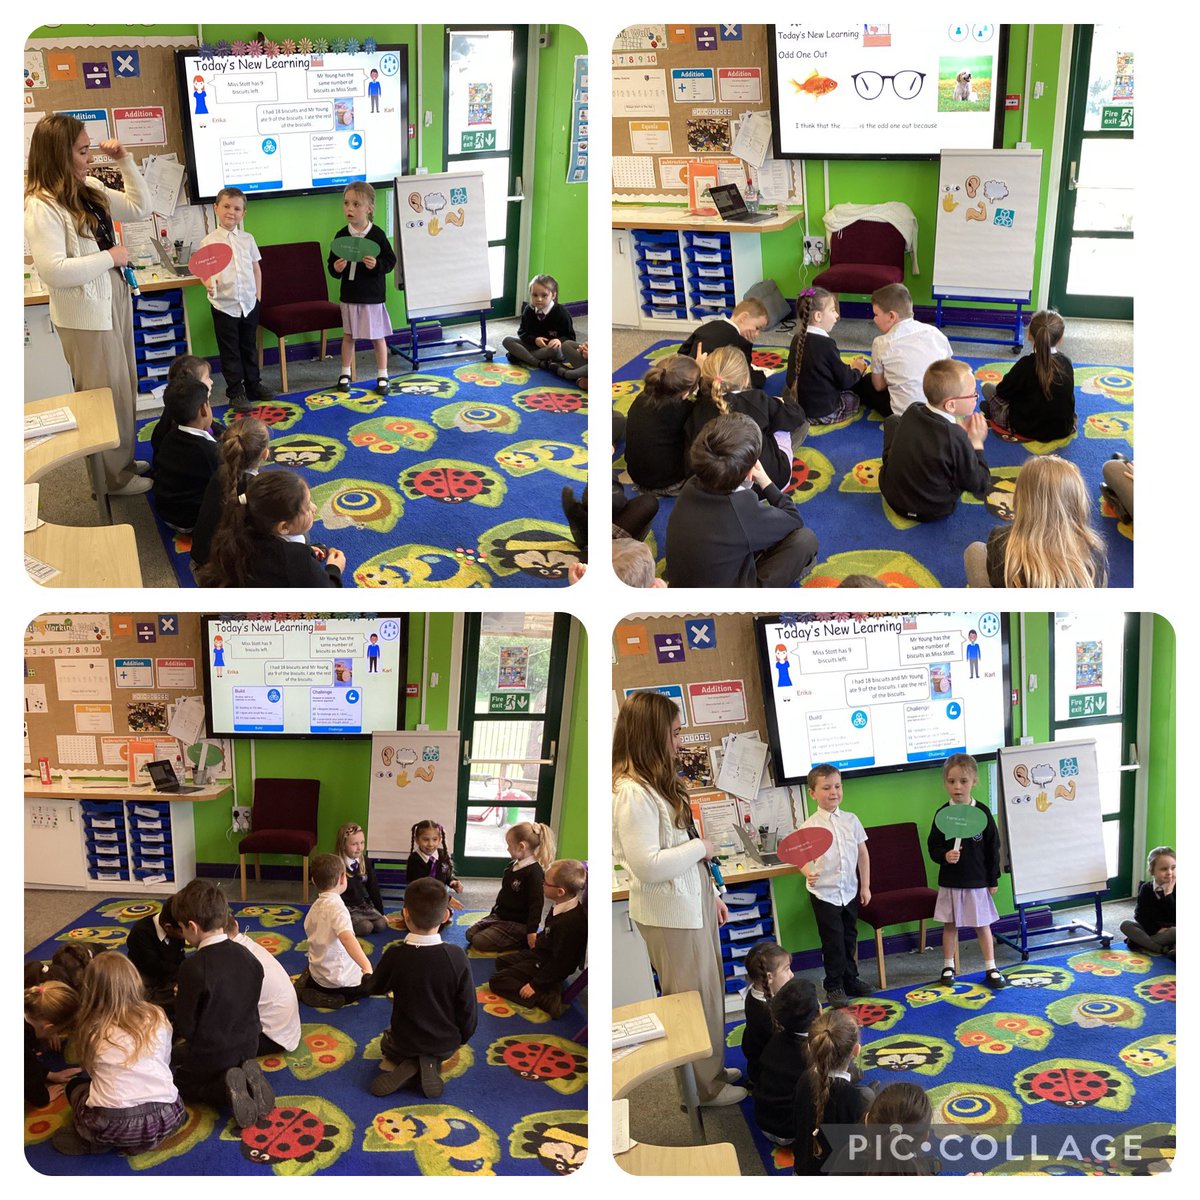 Year 1 working together and sharing ideas using sentence stems and talk tactics @voice21oracy @NWATrust